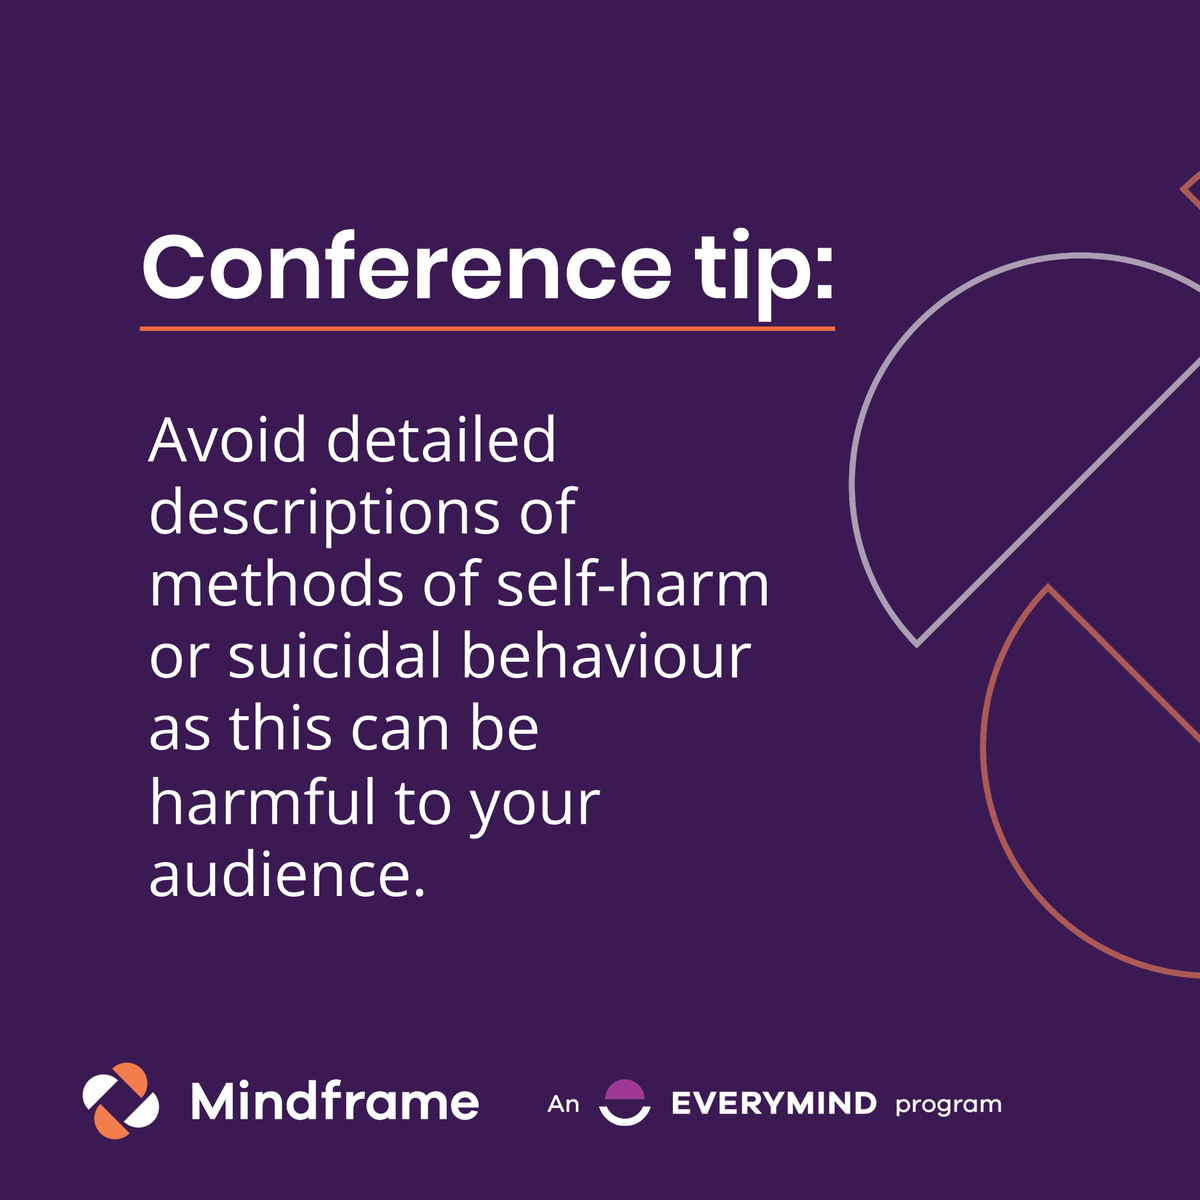 Good morning to all attending #NSPC24 in Adelaide this week! Delegates are reminded of the powerful role of language & images when communicating about #suicide. Mindframe has a free quick reference guide for anyone presenting or taking part in conference discussions that features…